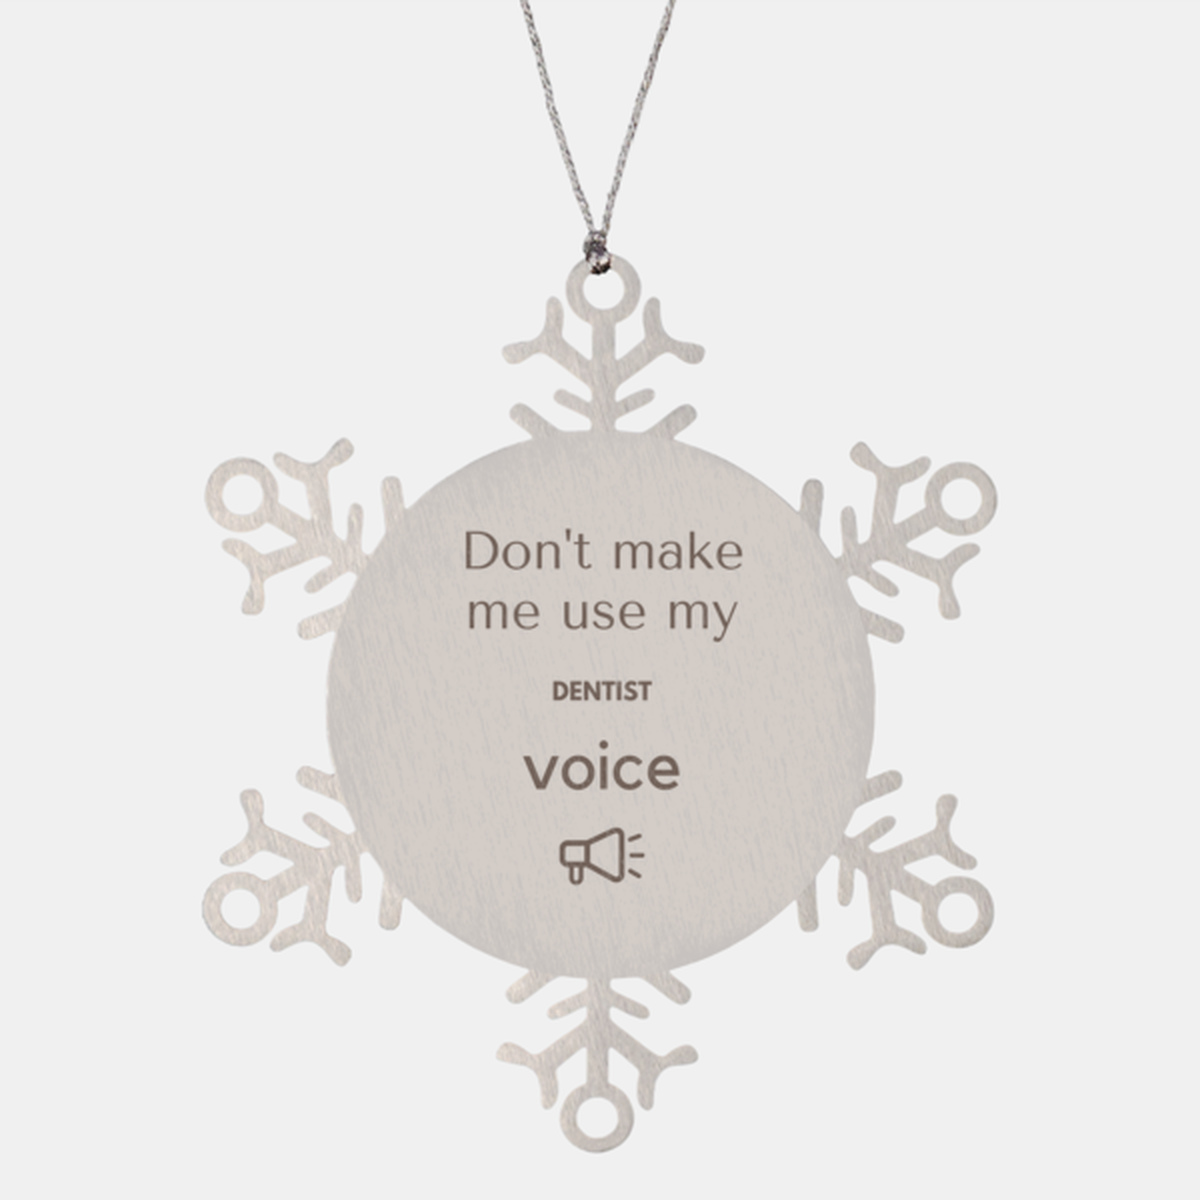 Don't make me use my Dentist voice, Sarcasm Dentist Ornament Gifts, Christmas Dentist Snowflake Ornament Unique Gifts For Dentist Coworkers, Men, Women, Colleague, Friends